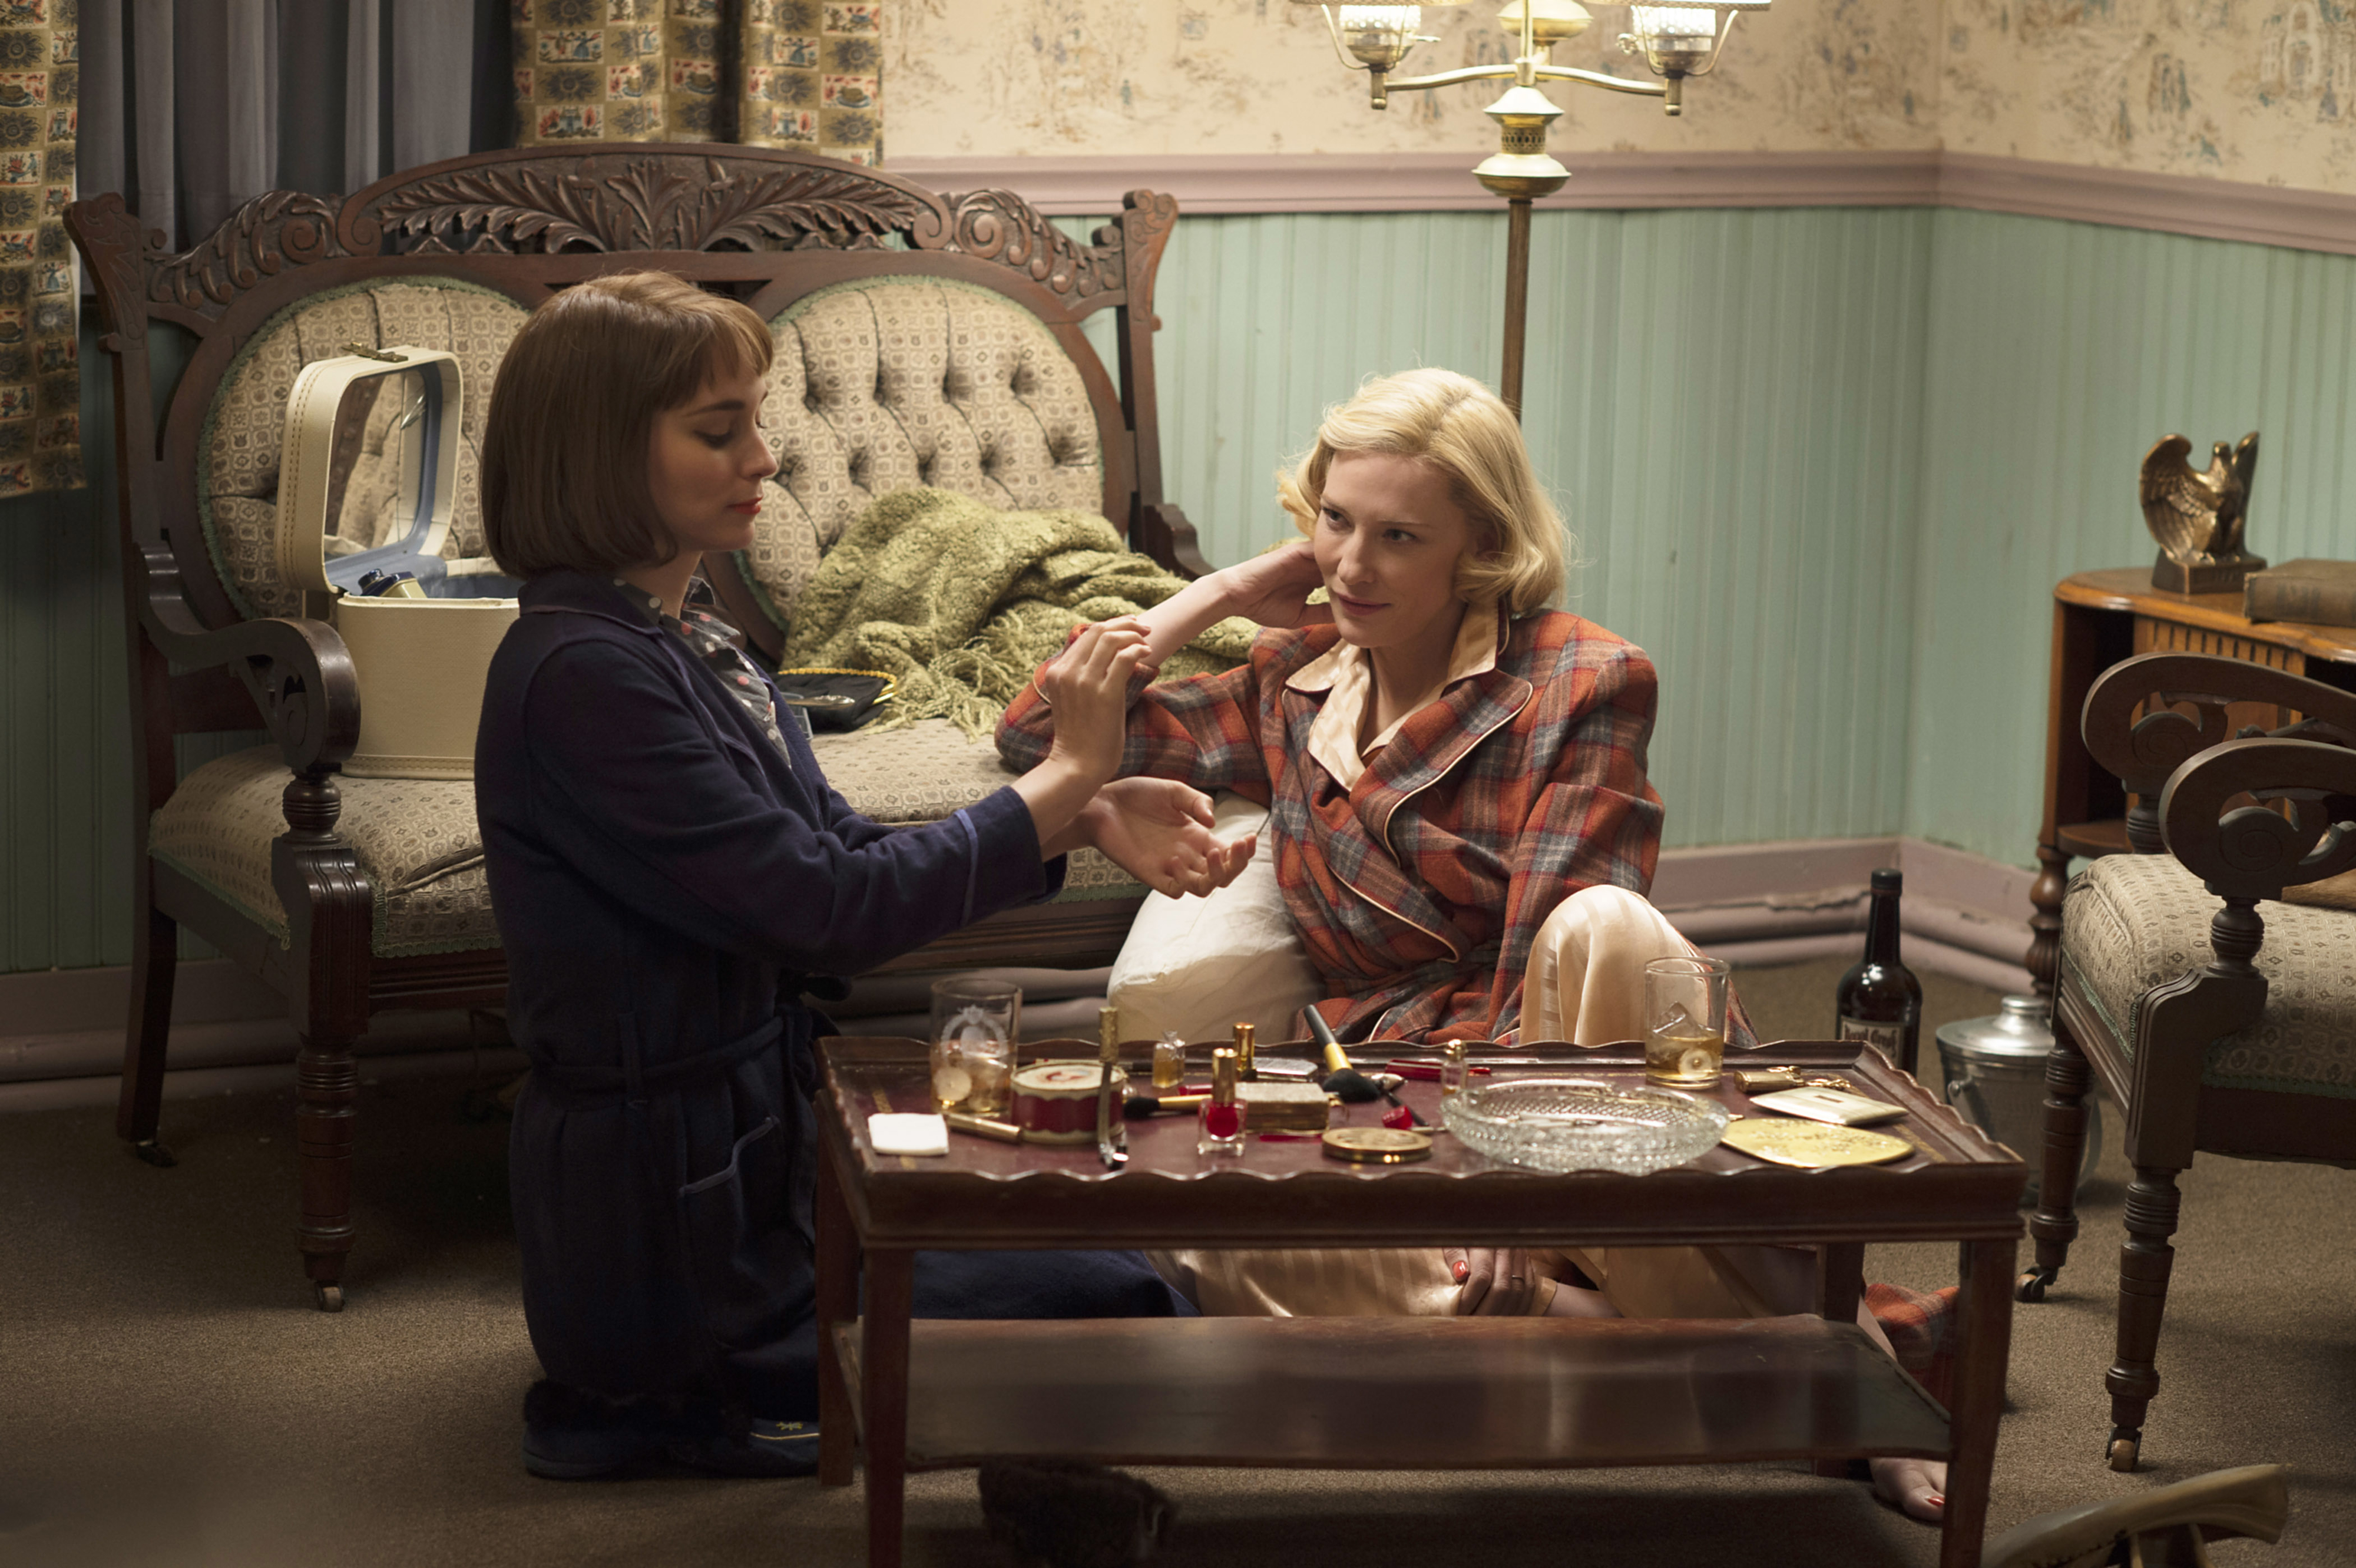 in a scene, Rooney and Cate sitting on the floor of a room with vintage furniture, Cate gazing at Rooney